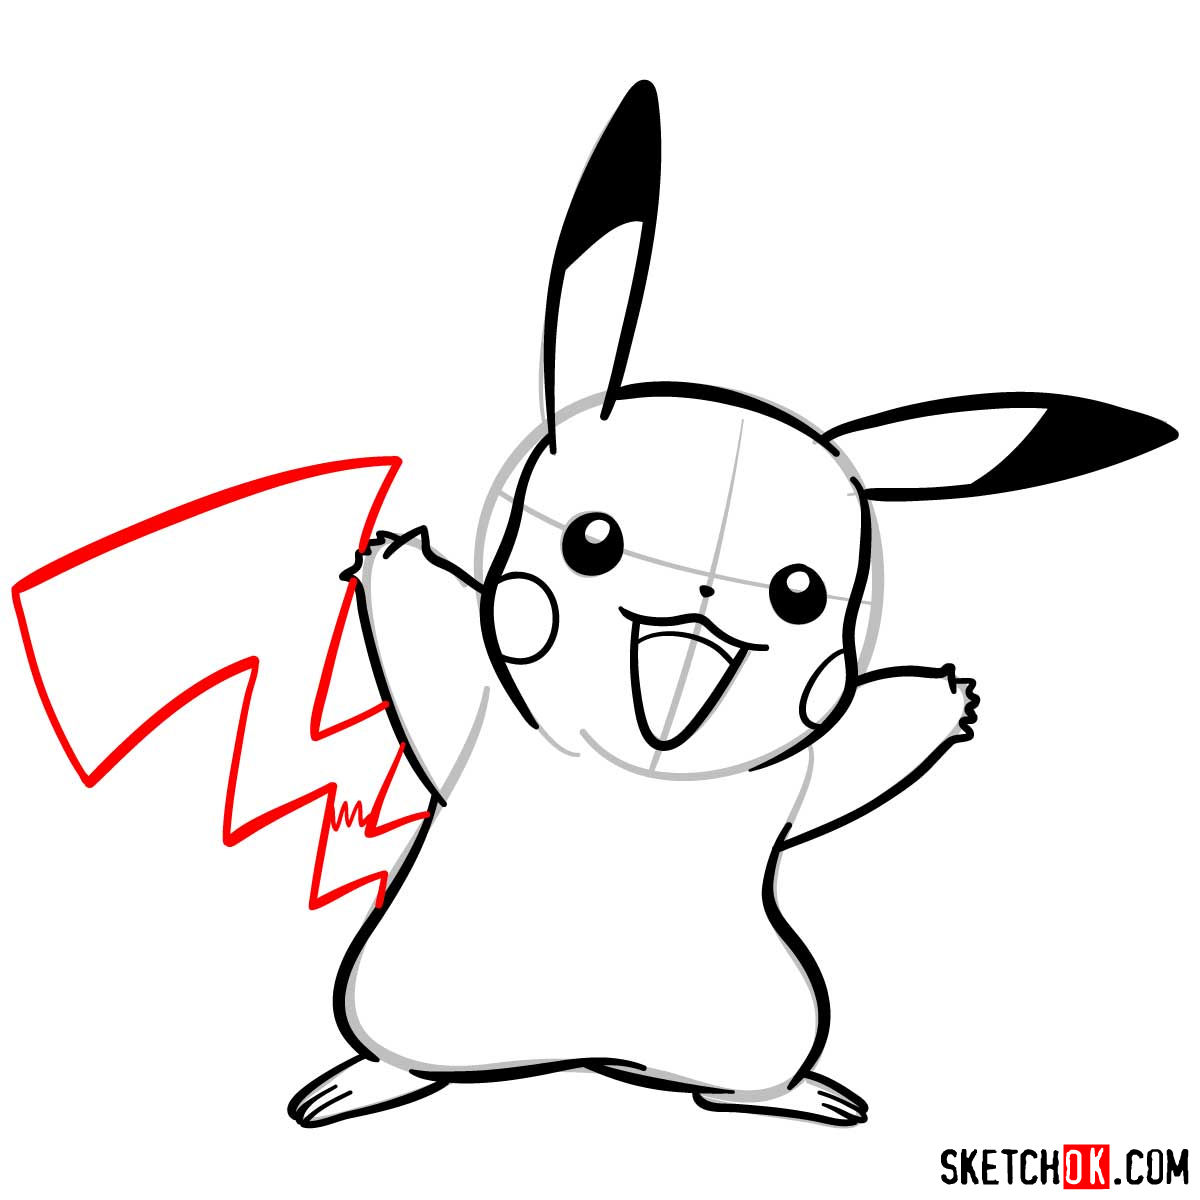 How to draw Pikachu Pokemon with arms wide open - step 09